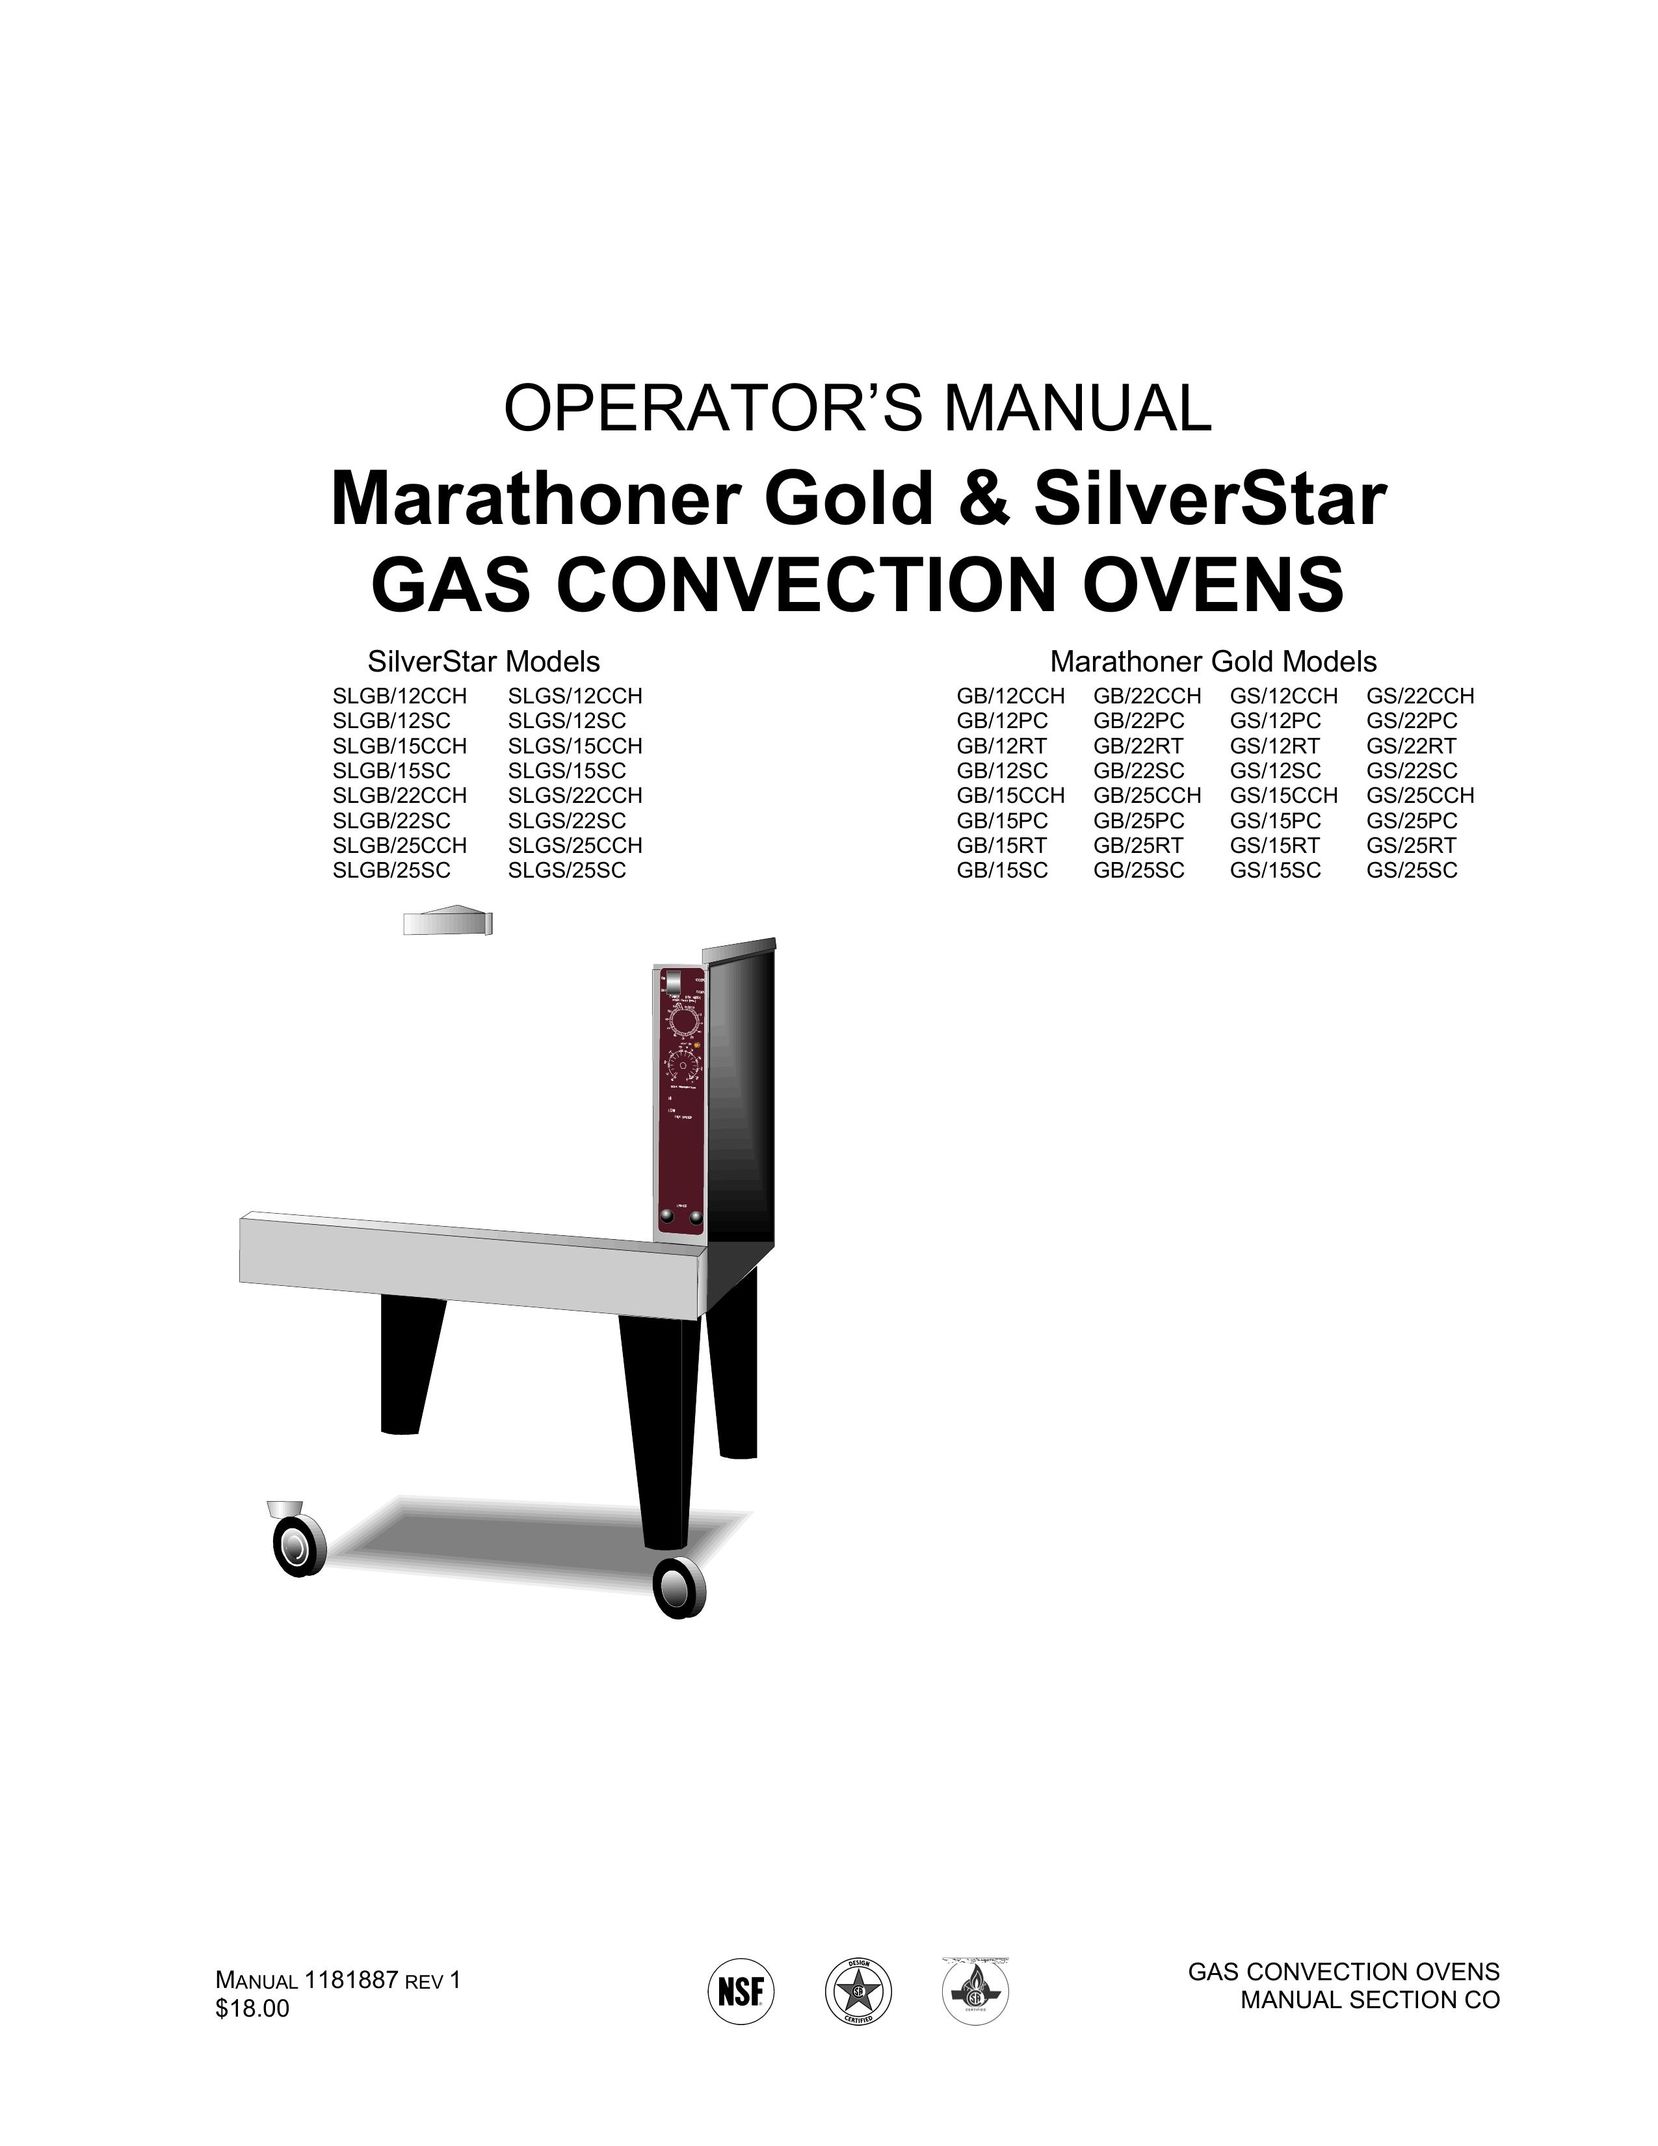 Southbend SLGS/15CCH Oven User Manual